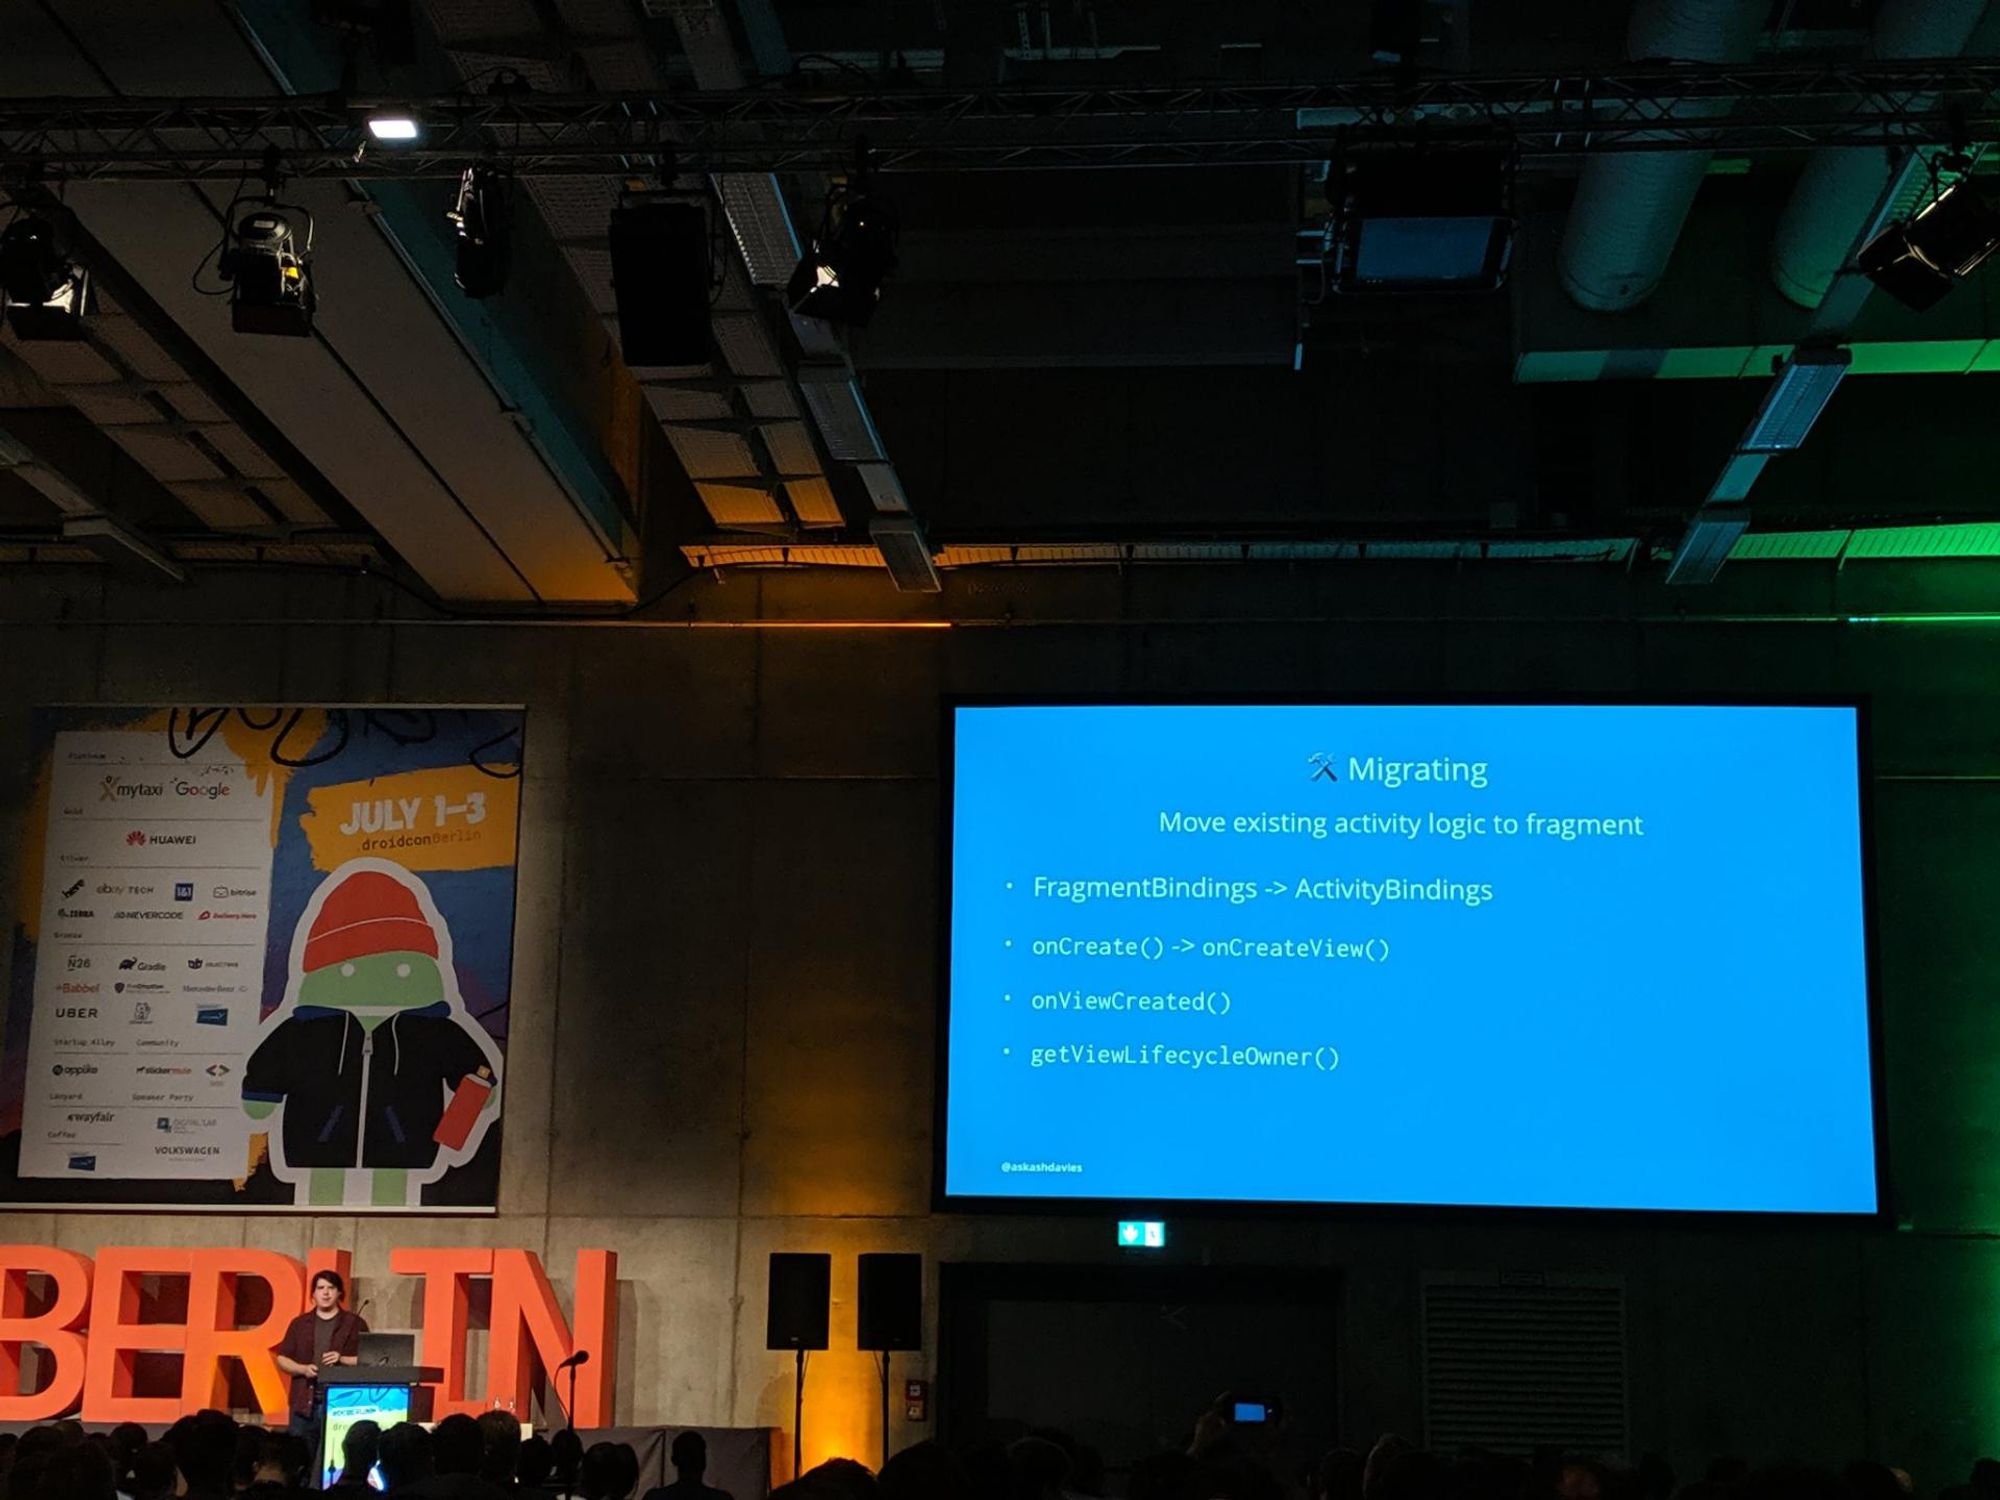 Droidcon Berlin: Navigation and the Single Activity